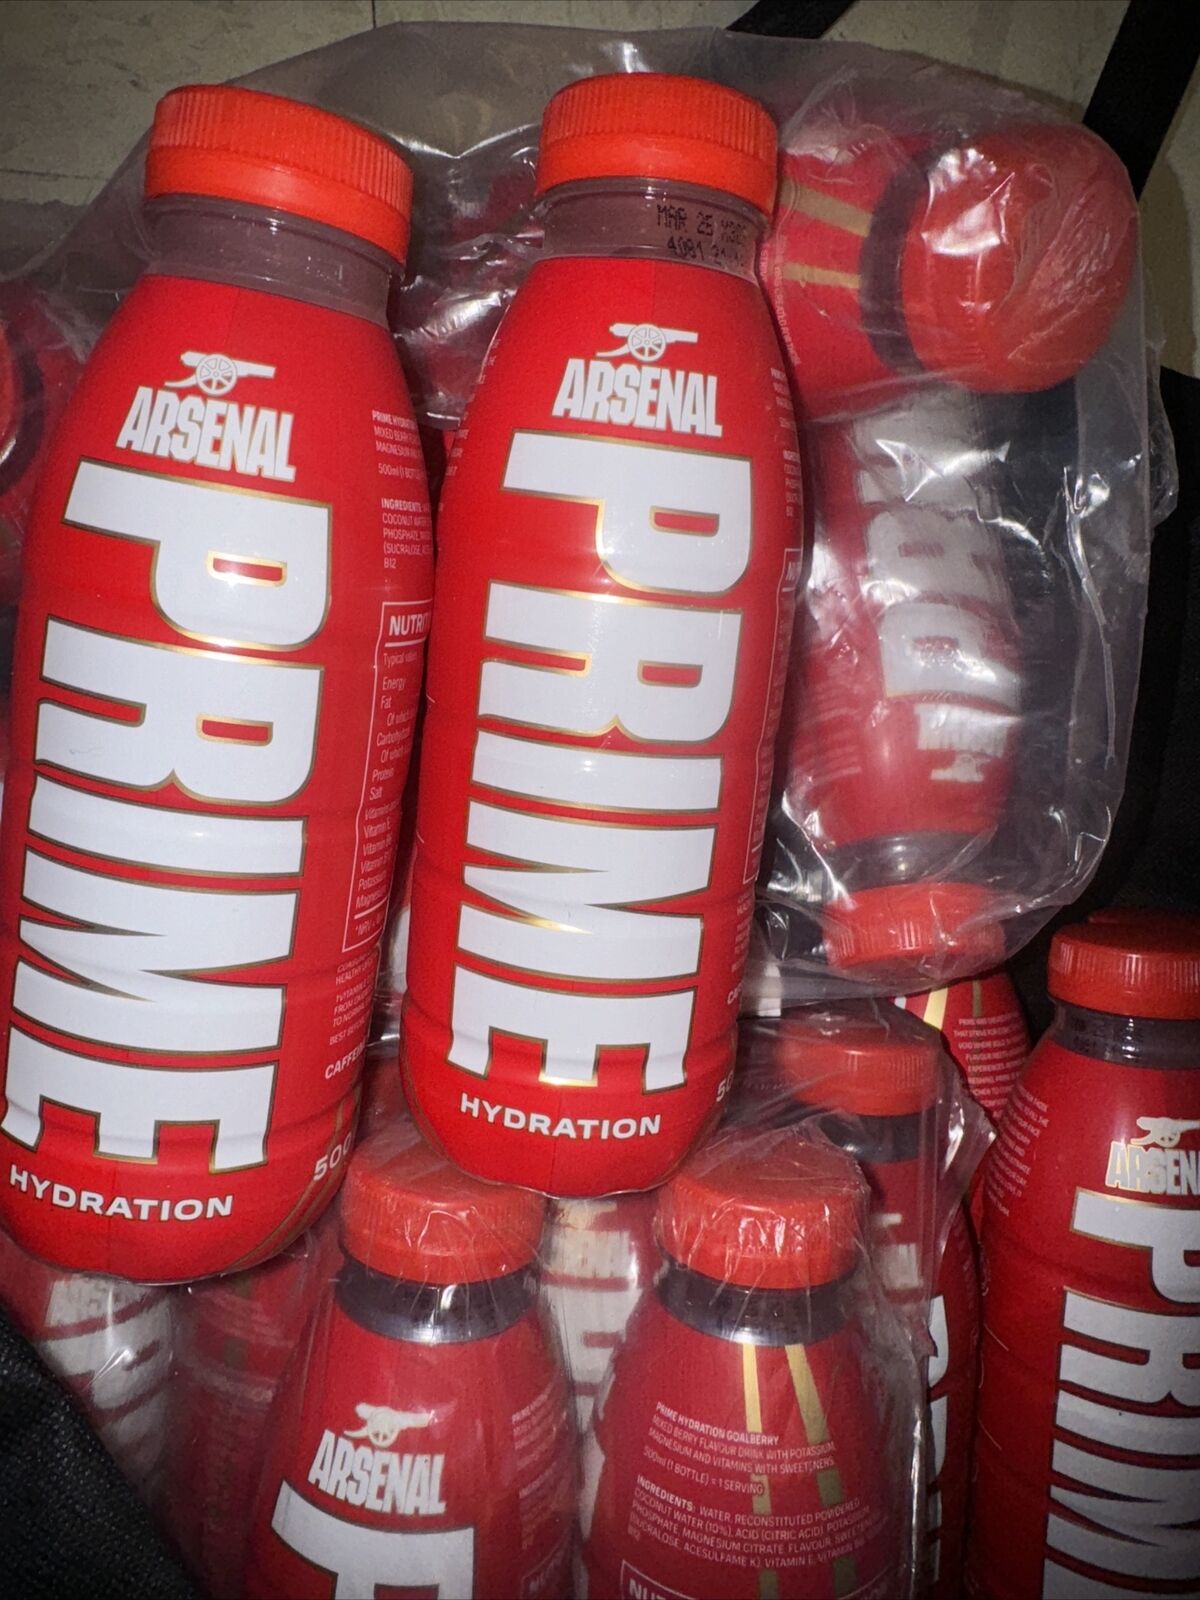 [EXCLUSIVE] ARSENAL PRIME HYDRATION GOALBERRY UK DRINK - US SELLER